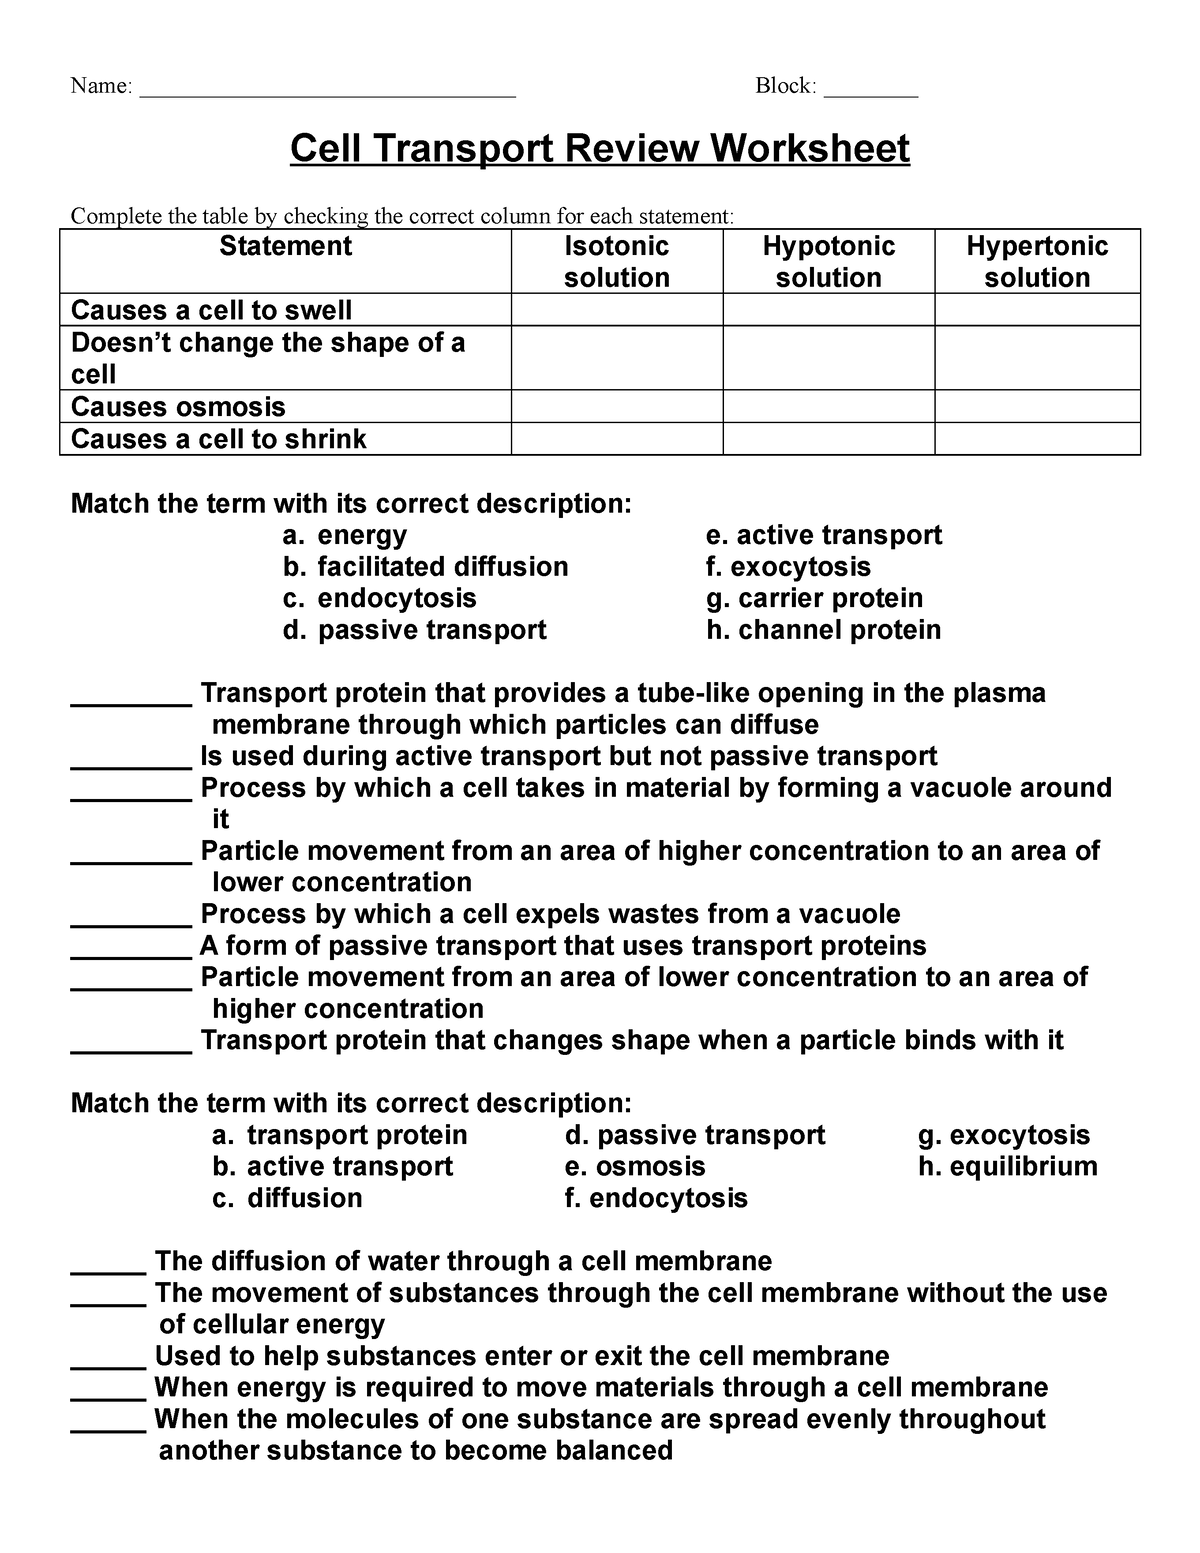 Cell Transport Review Worksheets - BLO20 - Wave optics - StuDocu Intended For Cell Transport Review Worksheet